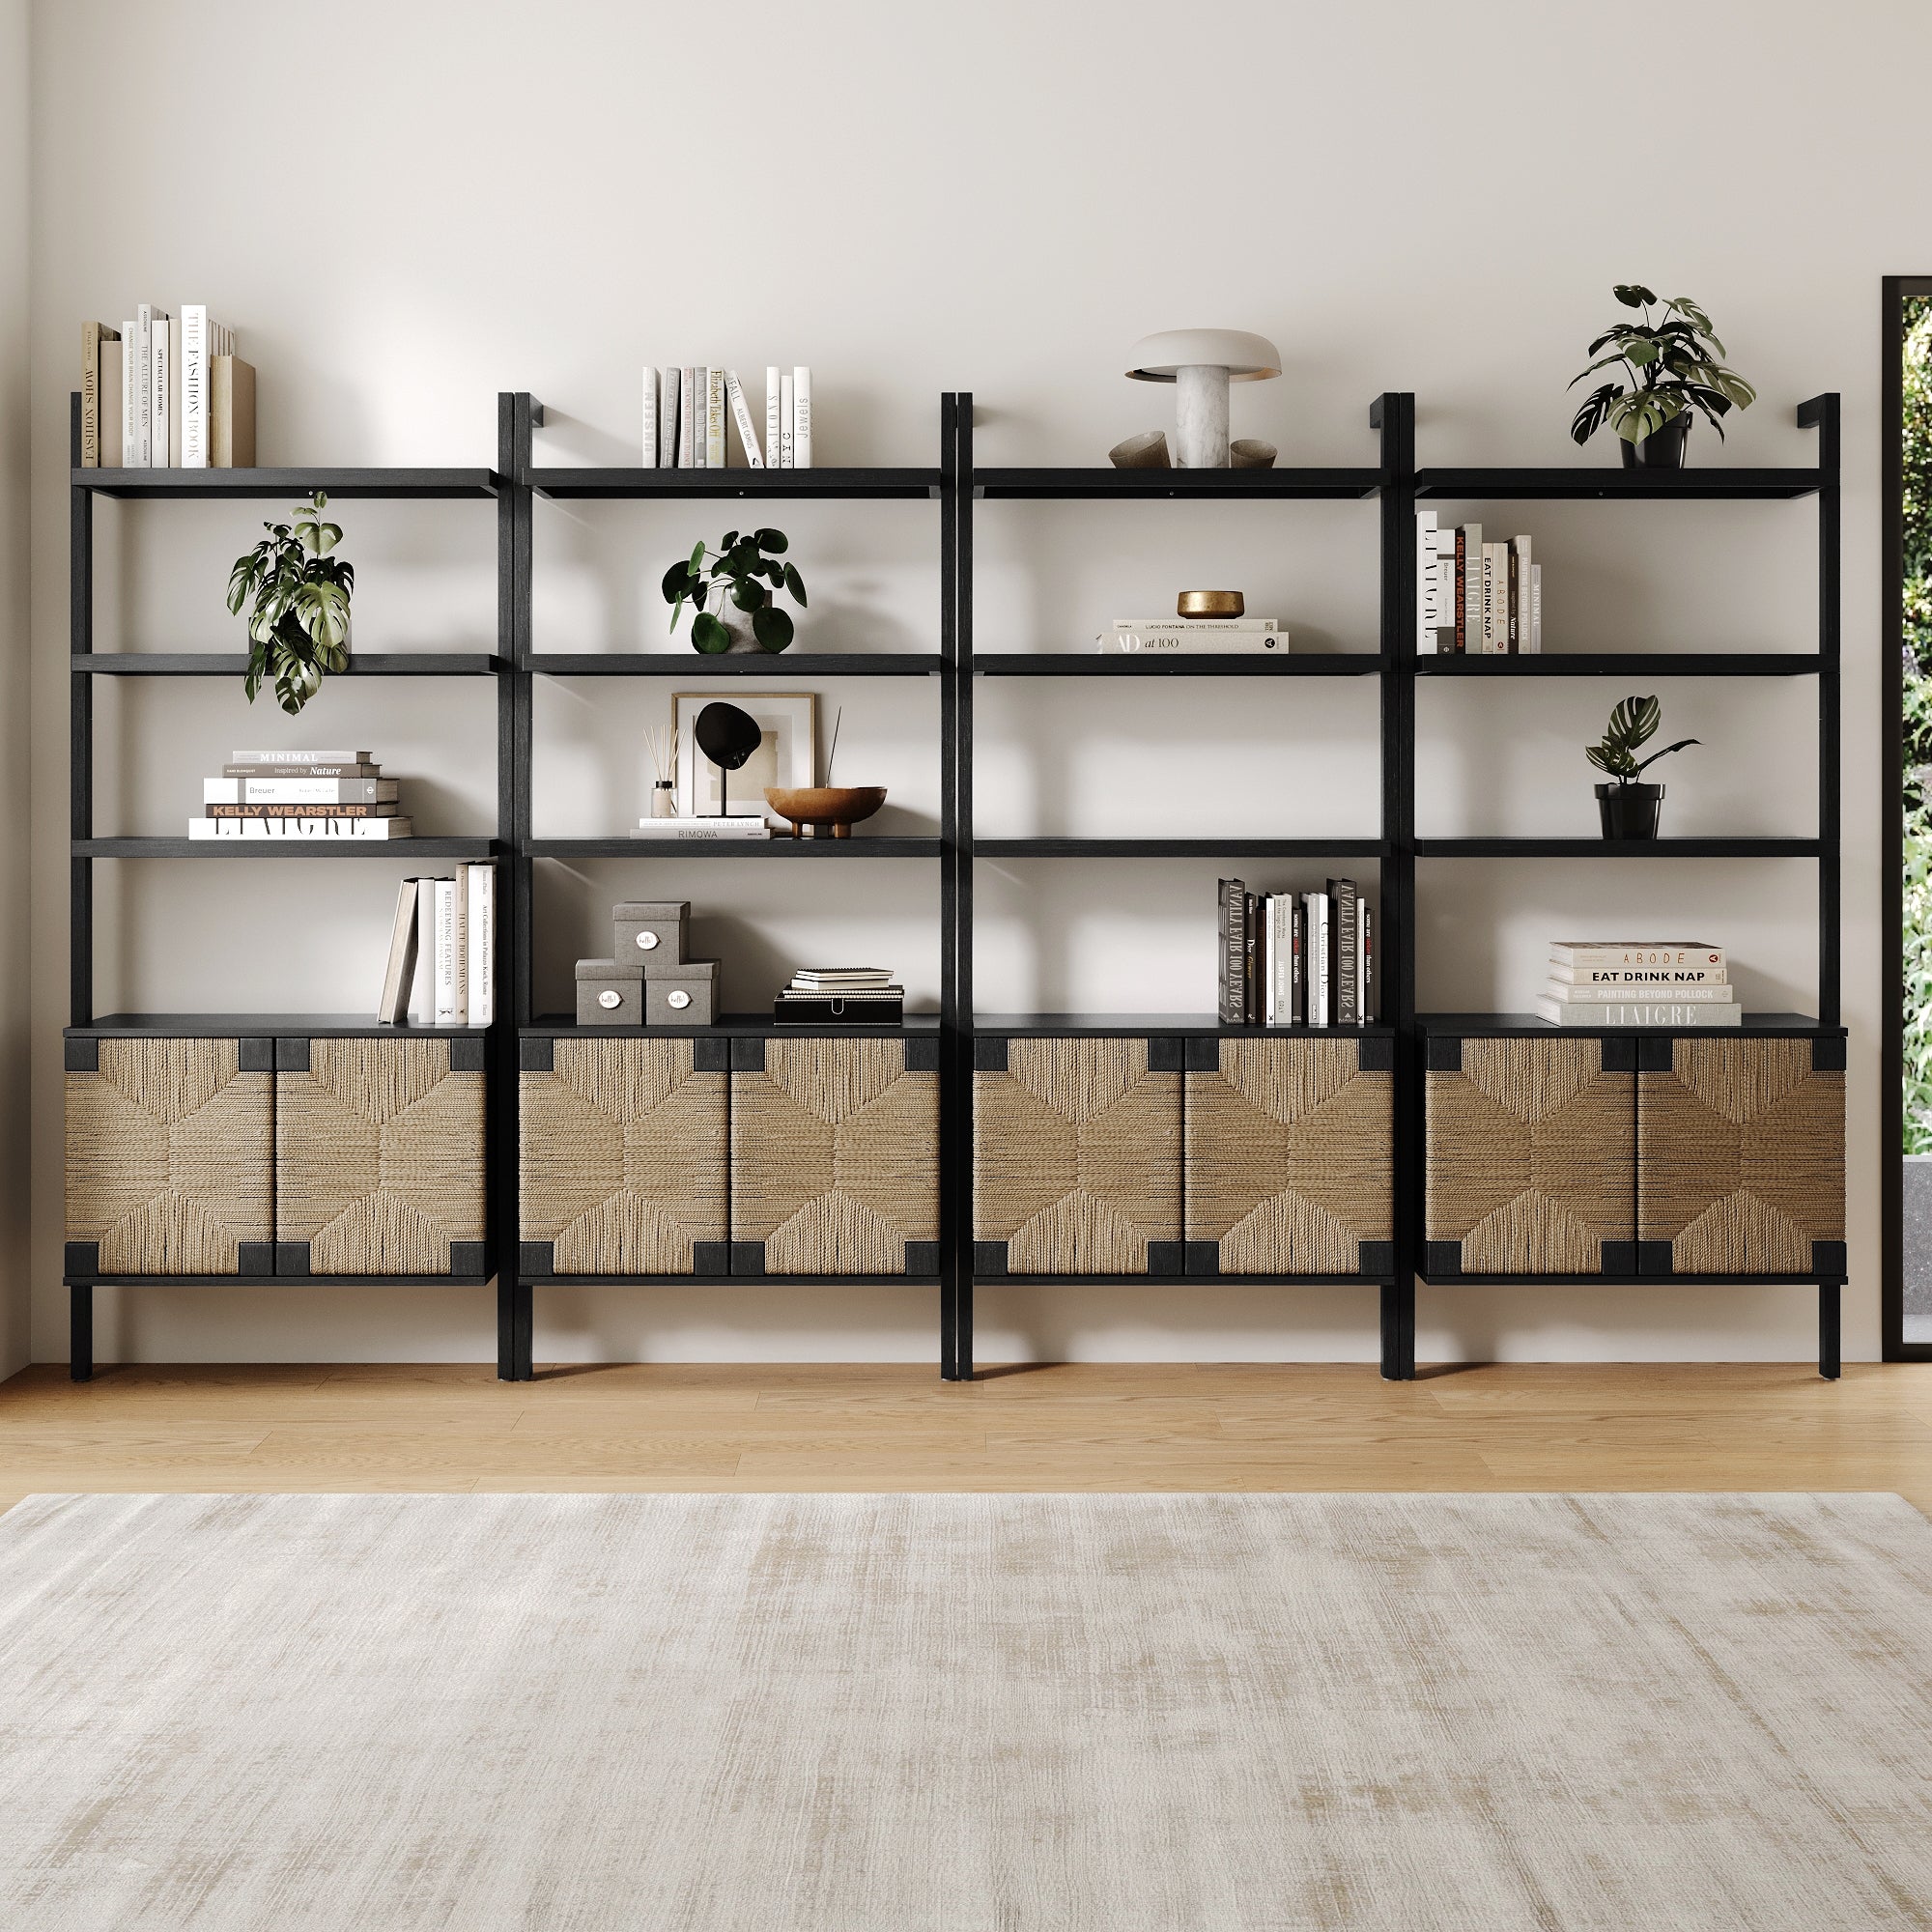 Seagrass Wall Bookshelves with Doors Black (Set of 4)